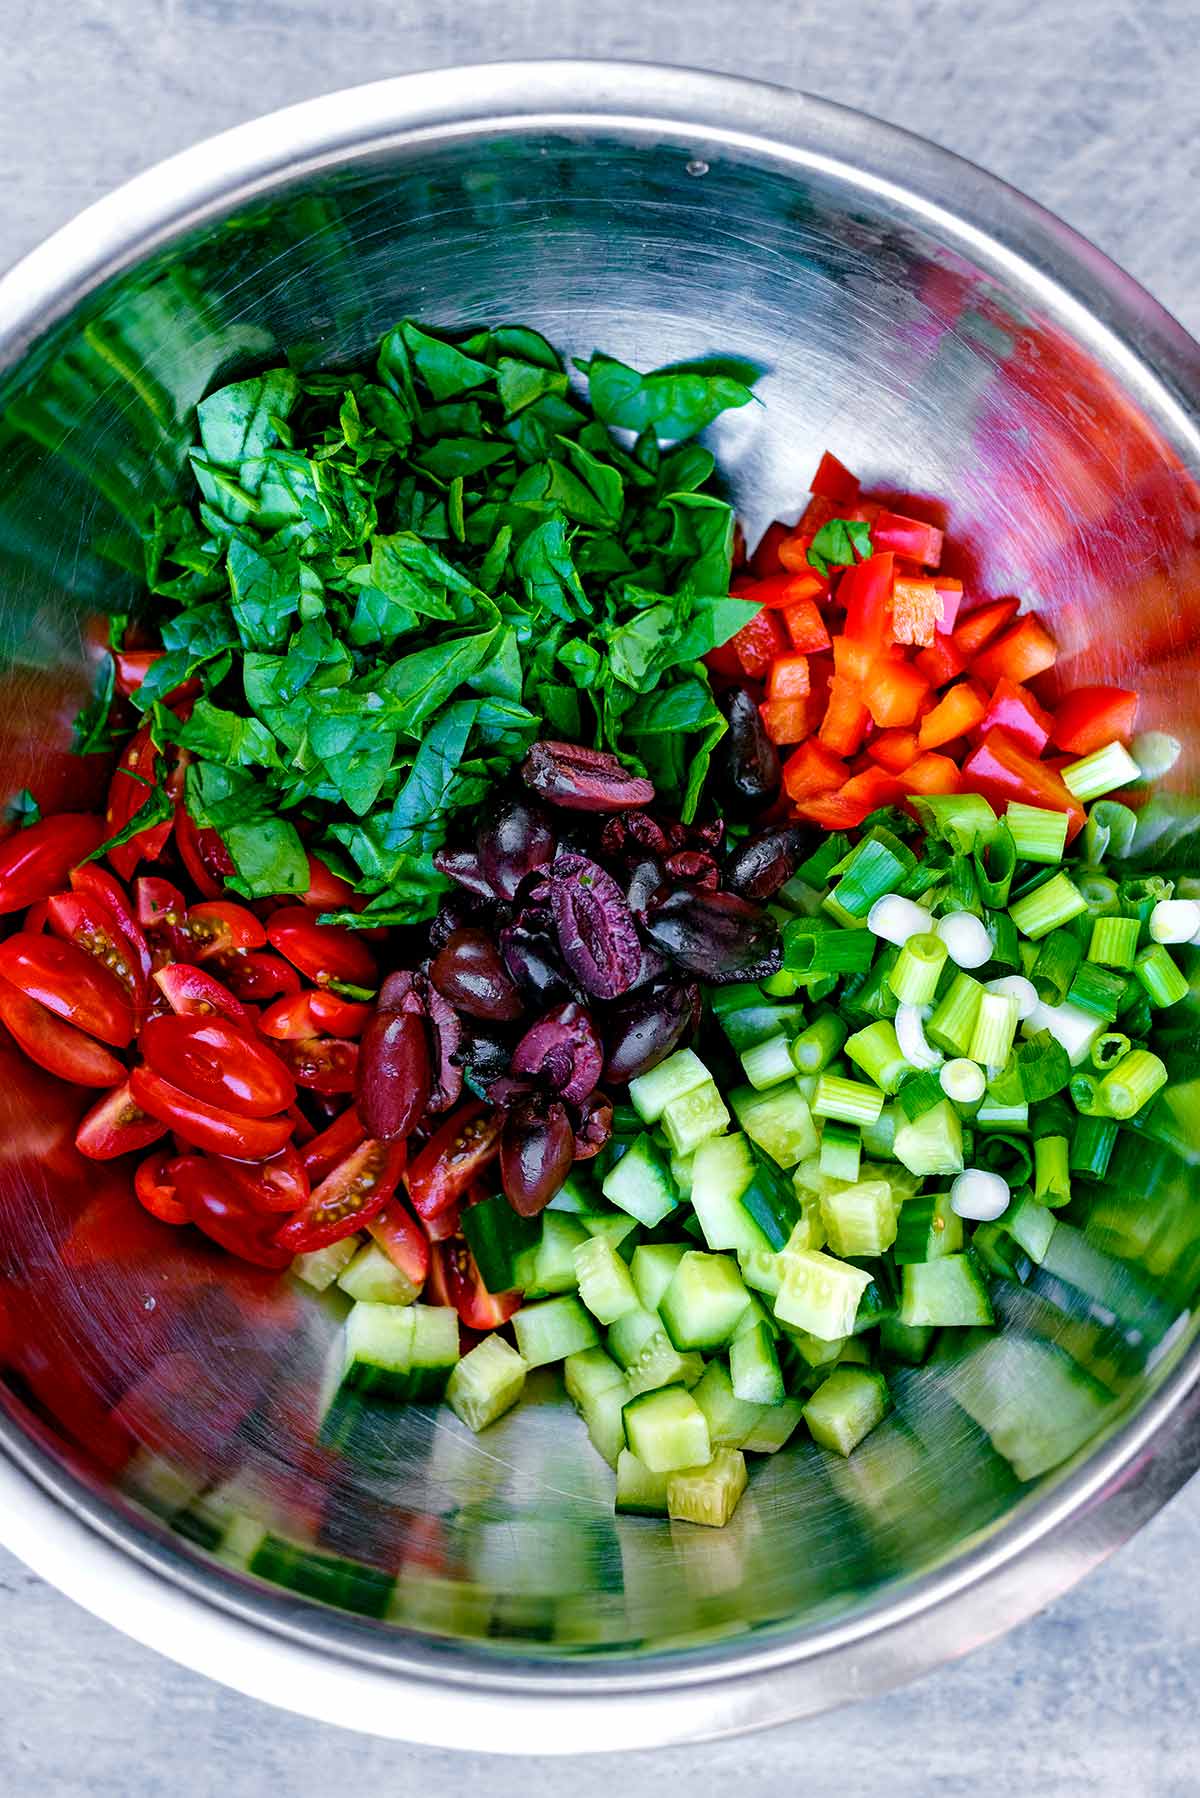 A stainless steel mixing bowl containing tomatoes, spinach, red pepper, onions, cucumber and olives.